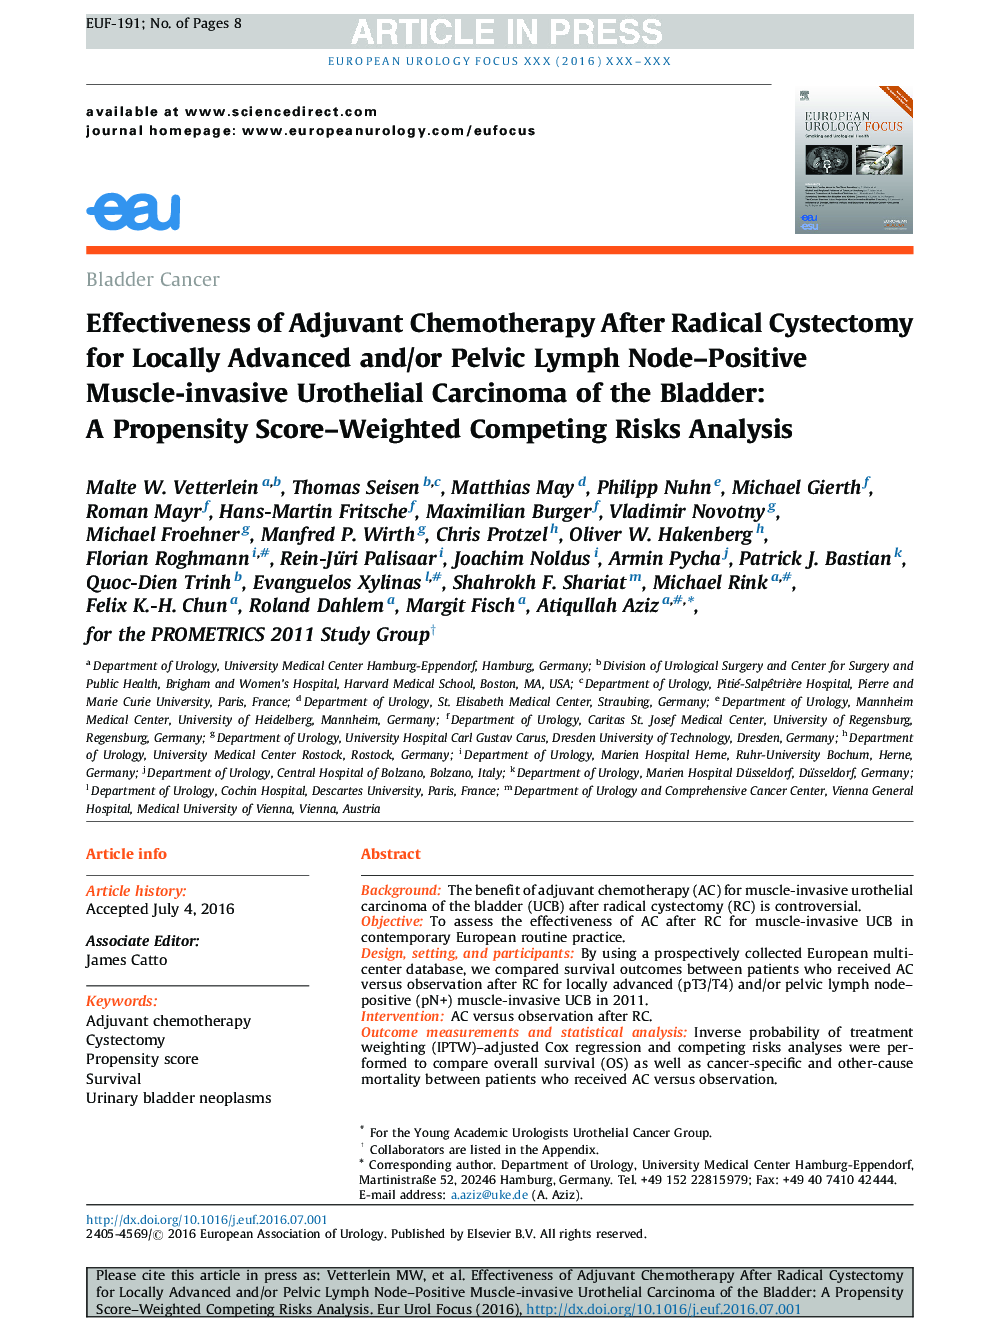 Effectiveness of Adjuvant Chemotherapy After Radical Cystectomy for Locally Advanced and/or Pelvic Lymph Node-Positive Muscle-invasive Urothelial Carcinoma of the Bladder: A Propensity Score-Weighted Competing Risks Analysis